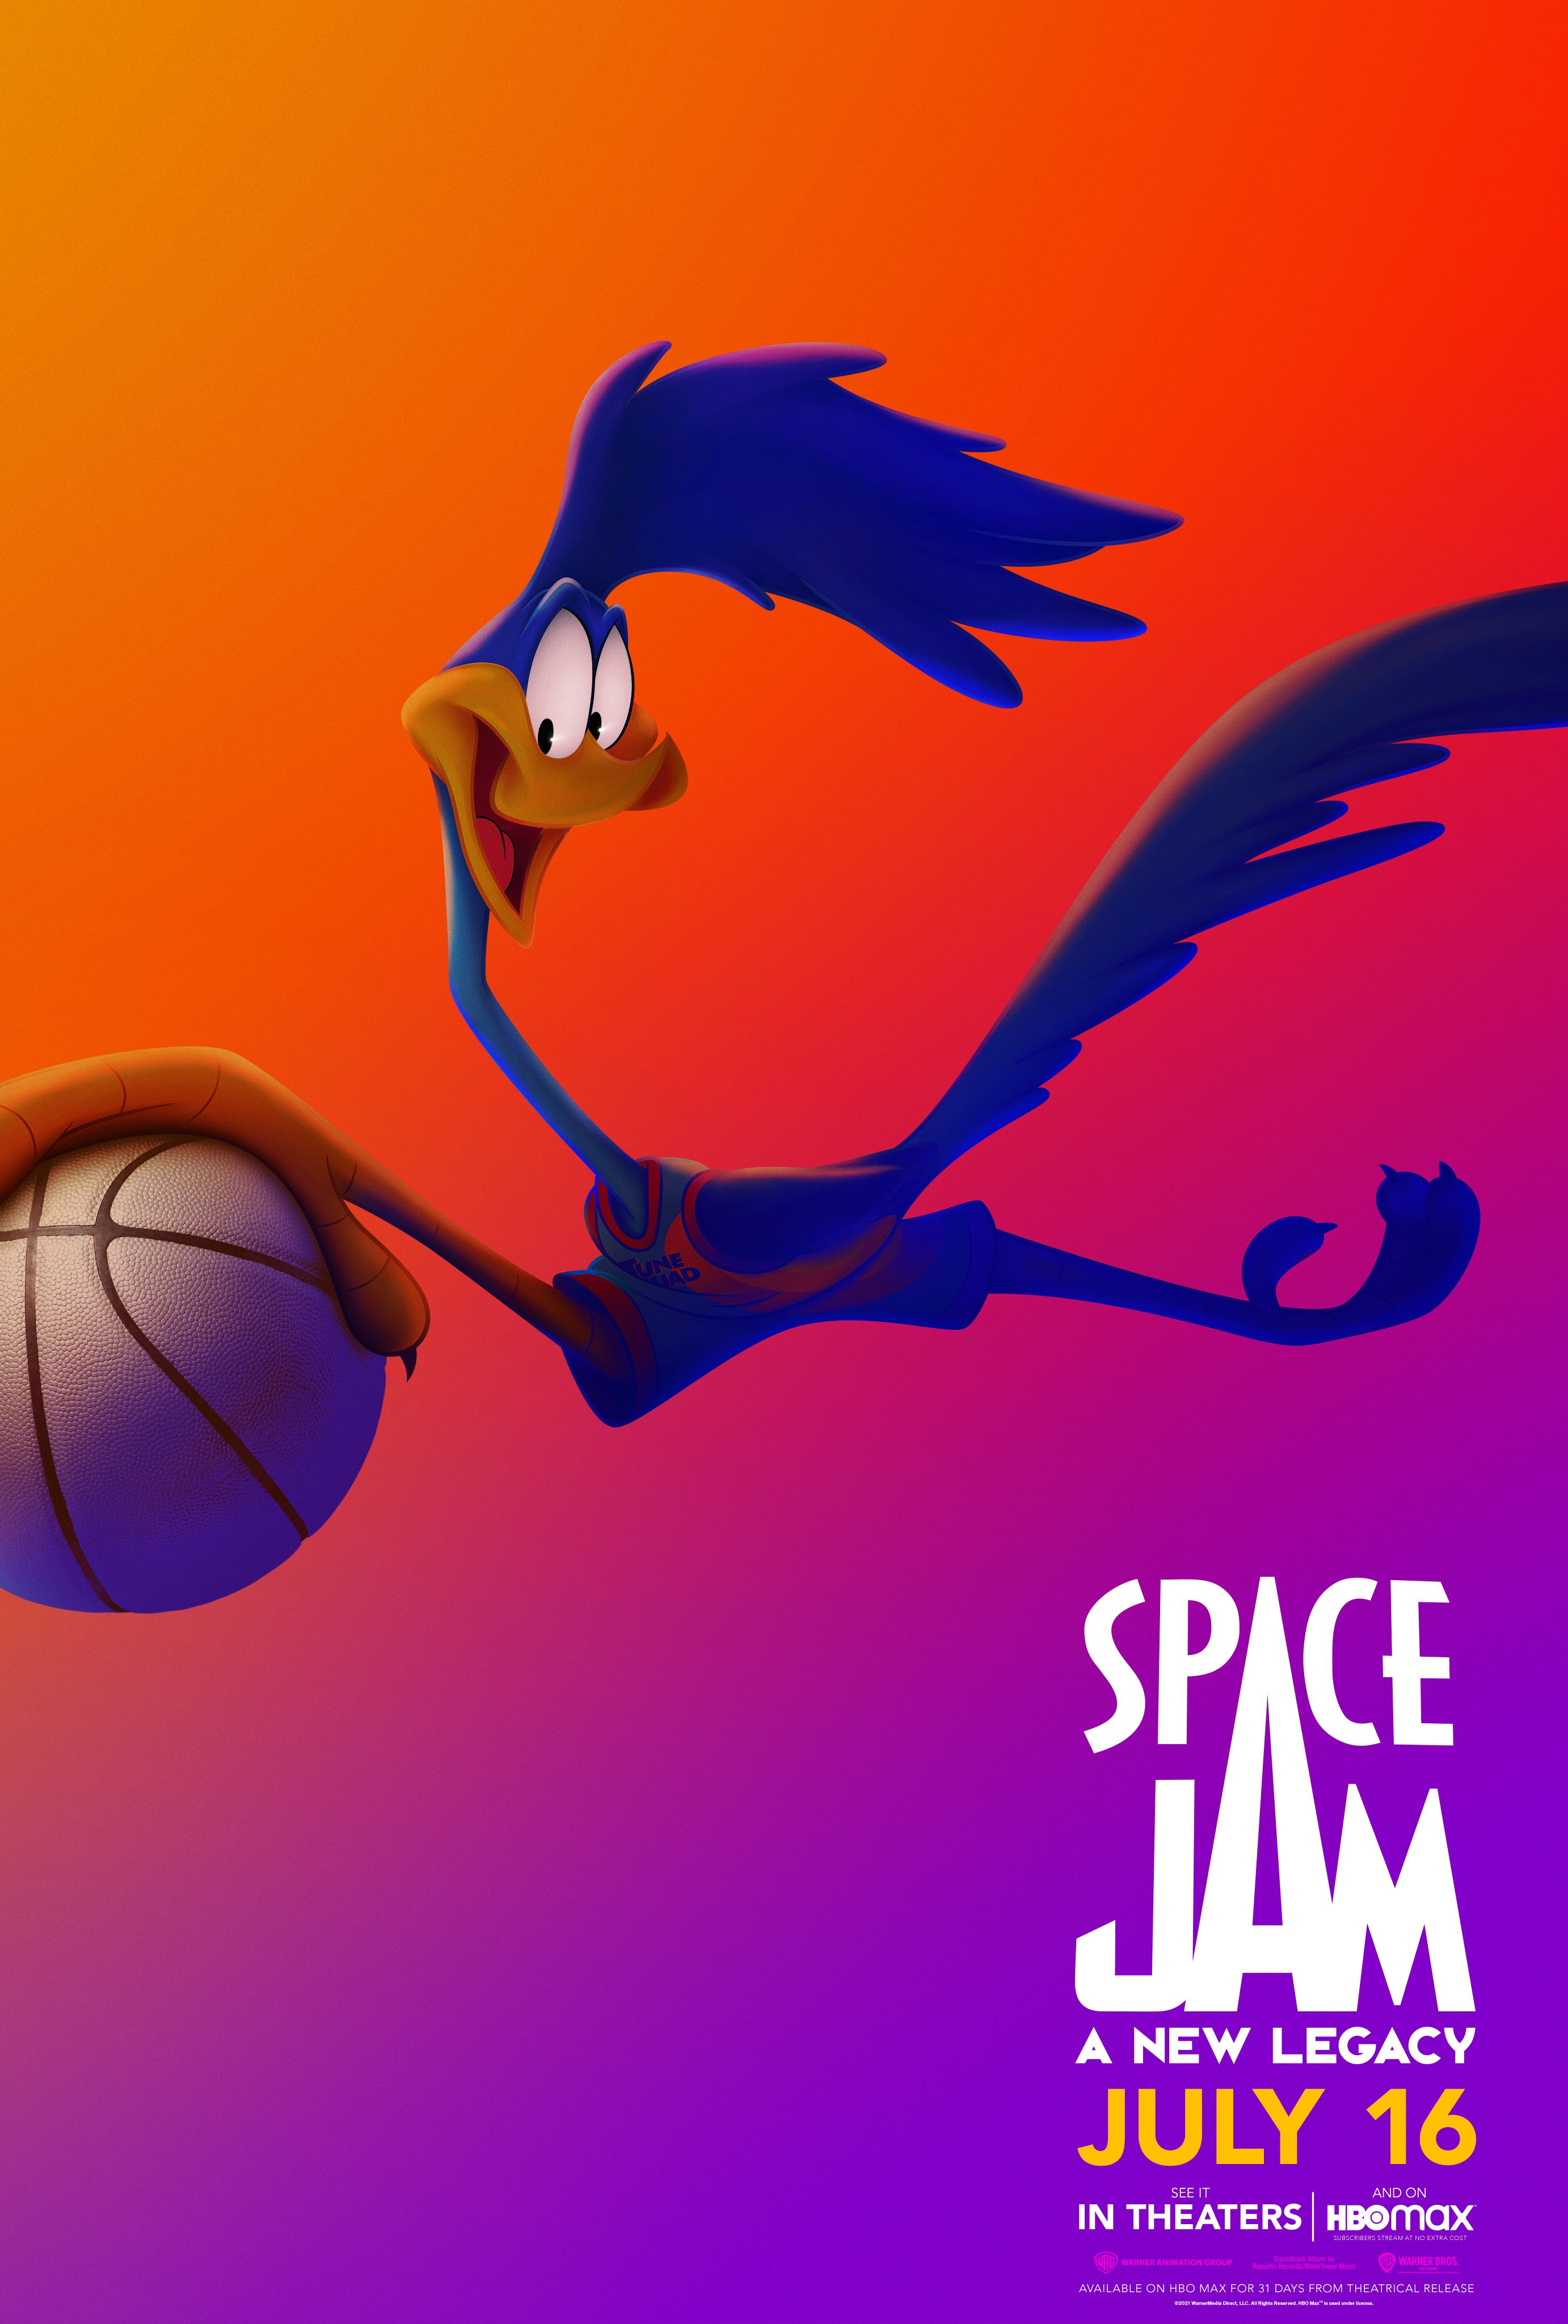 Speedy Gonzales Gets His Own 'Space Jam' Sequel Movie Poster